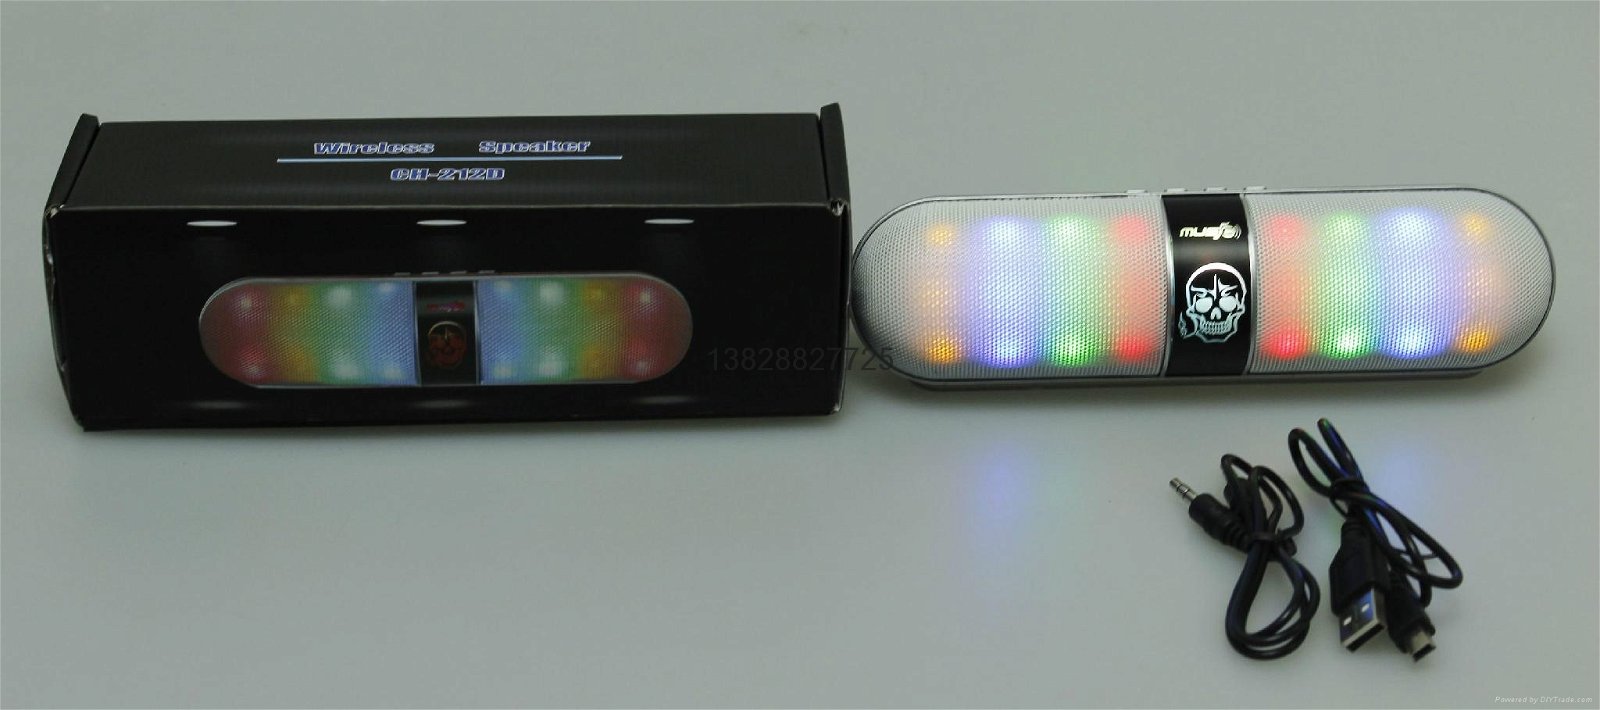 New led portable wireless bluetooth speaker made 2